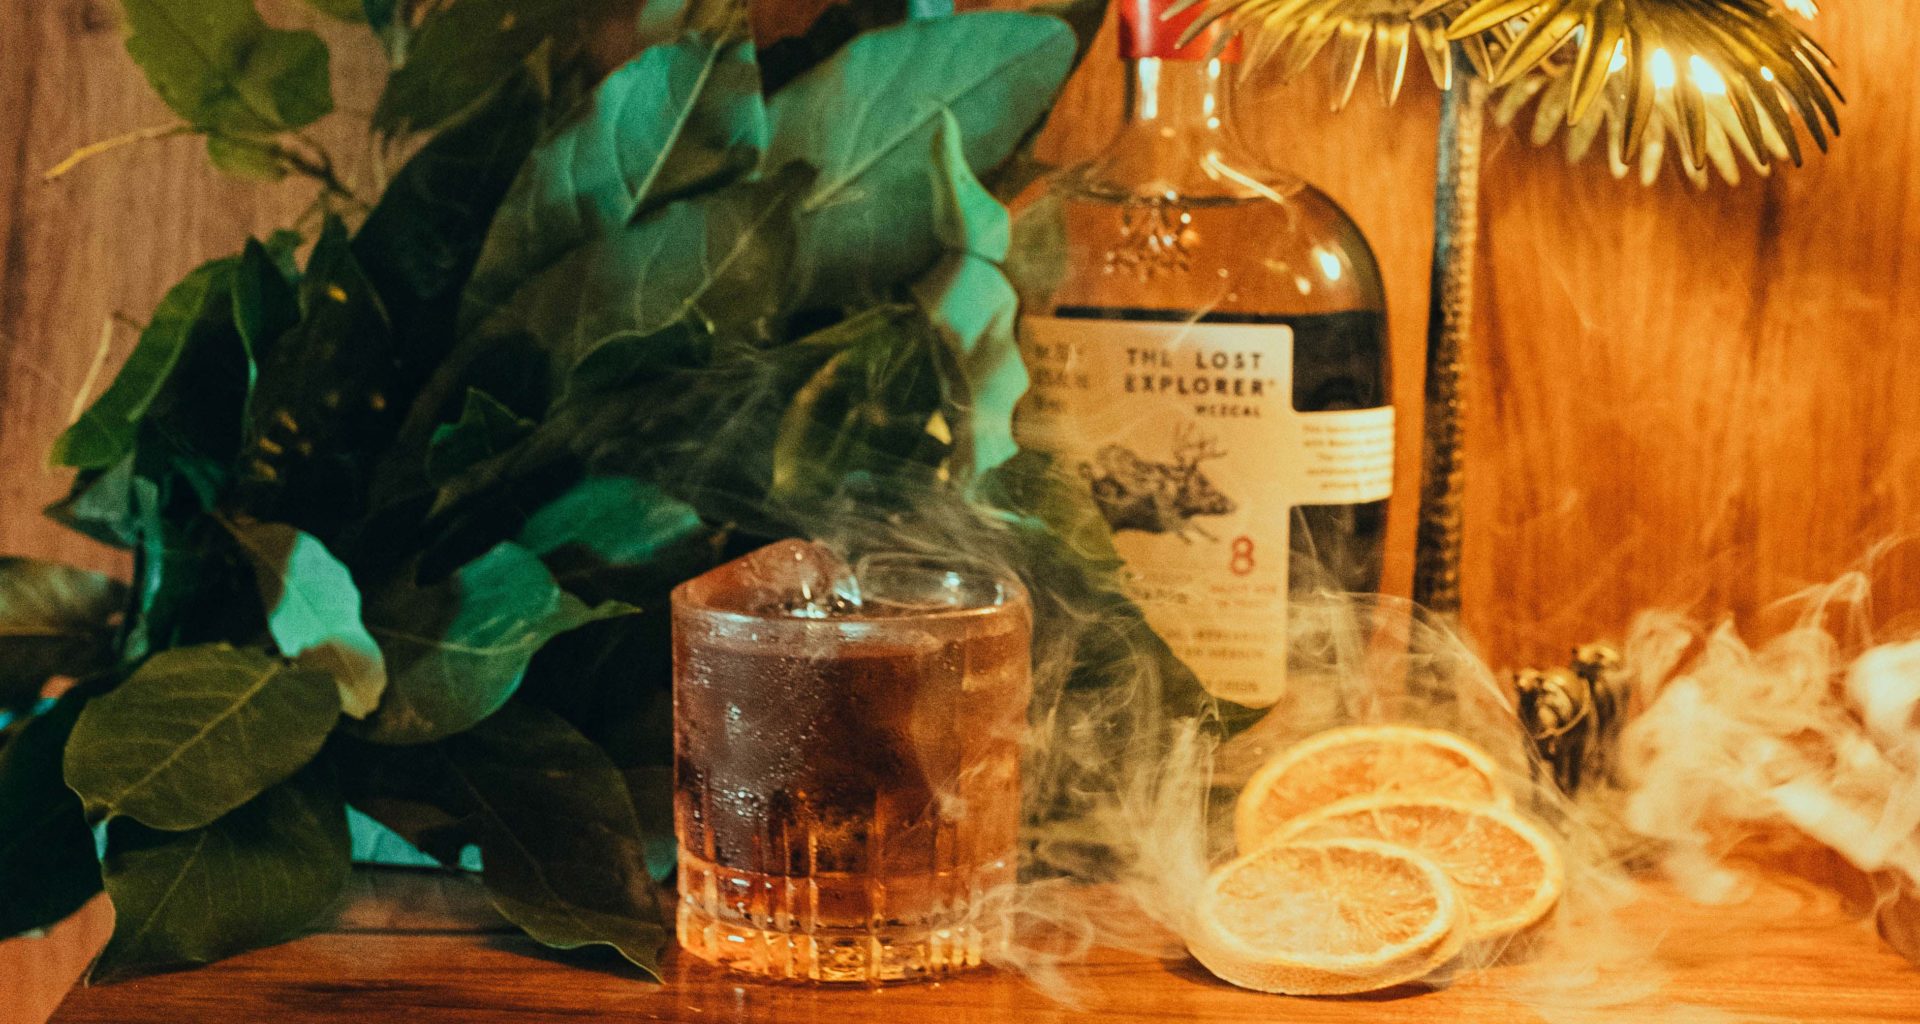 Cocktail with smoke and dehydrated orange slices on one side with a background of plants and a bottle of The Lost Explorer Espadín